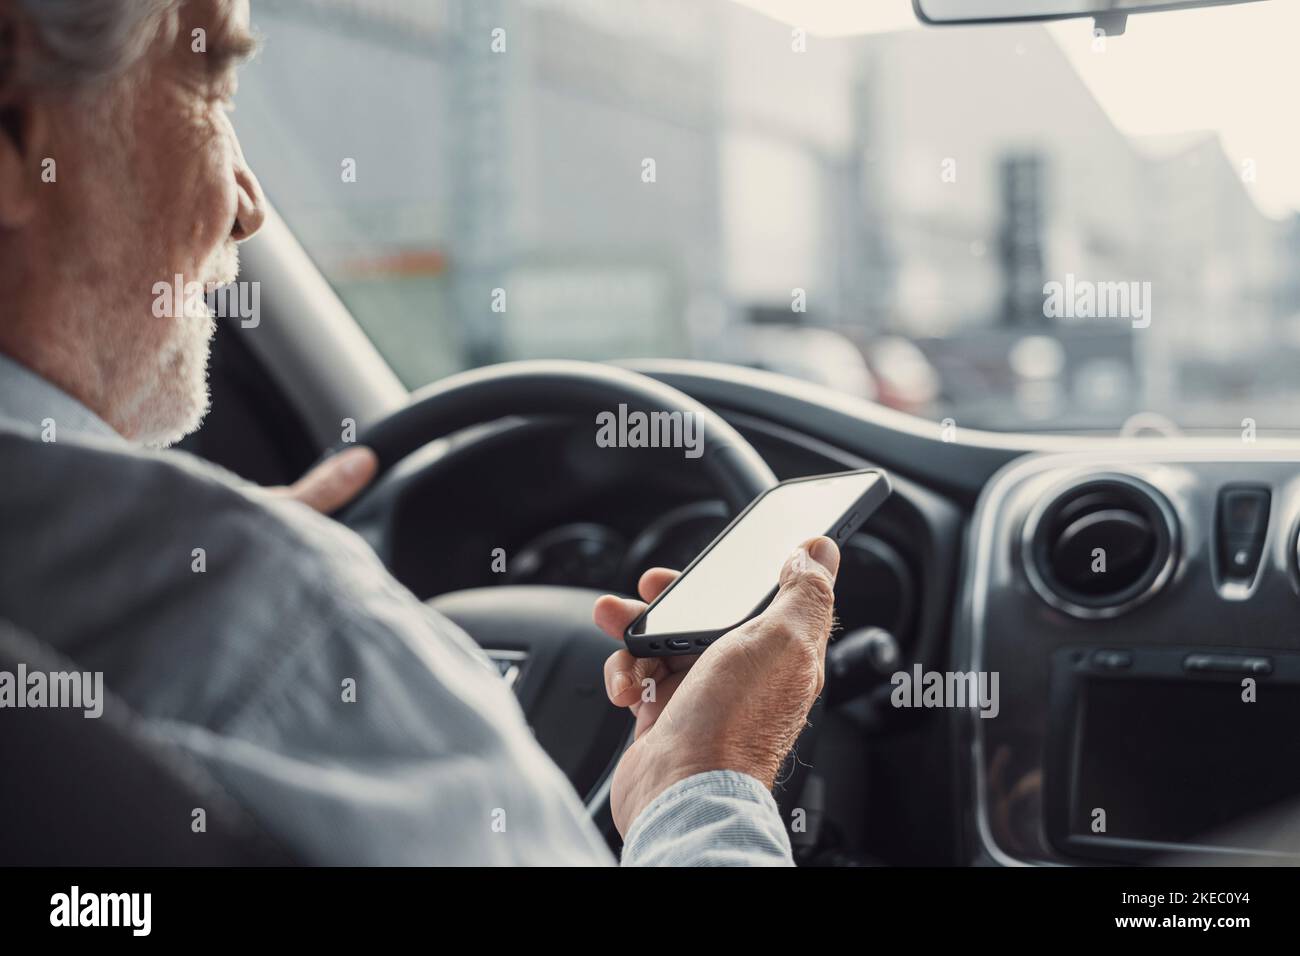 Man looking at mobile phone while driving a car. Old pensioner person distracting texting and chatting. Stock Photo